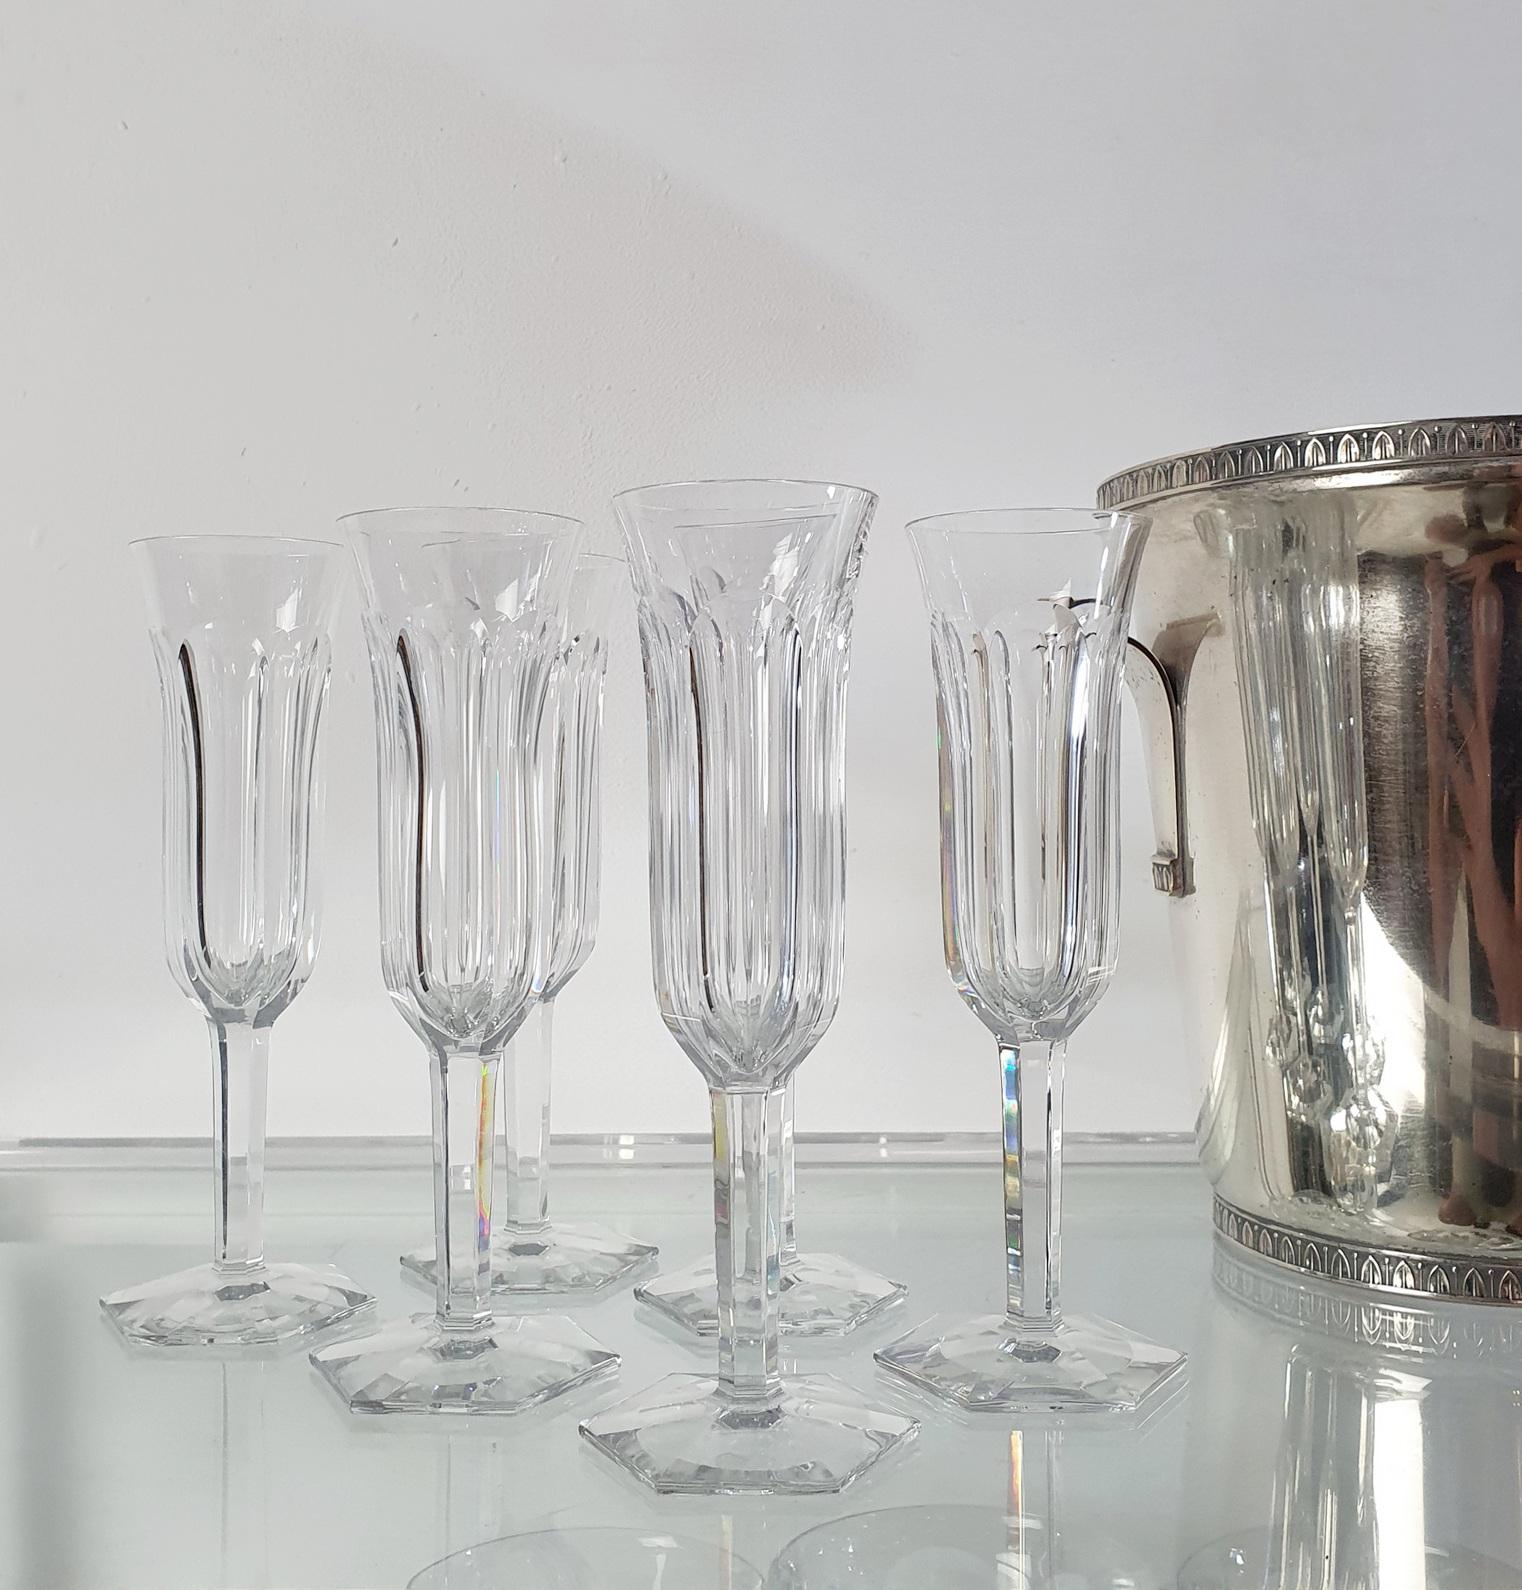 A wonderful vintage set of 6/eight tall Harcourt 1841 Champagne flutes by Baccarat, France. Marked Baccarat, France in the bottom. No chipping or damage.

Pure, powerful and elegant at the same time, set on its hexagonal base, the most famous of the